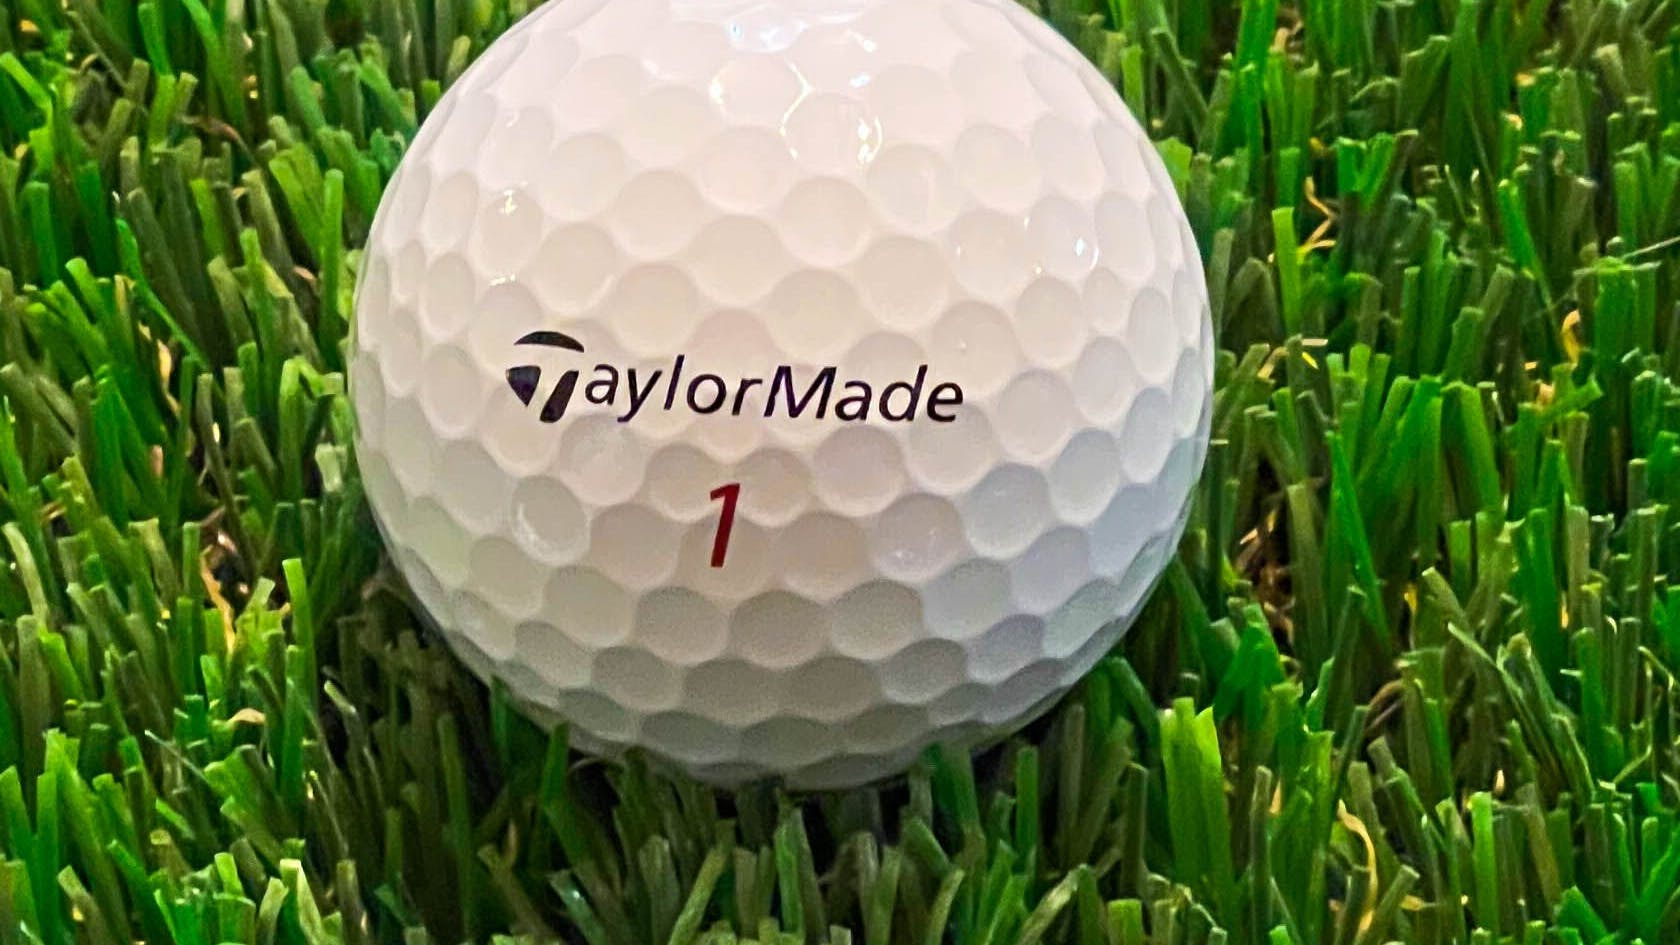 The TaylorMade TP5x ball sitting in the grass.